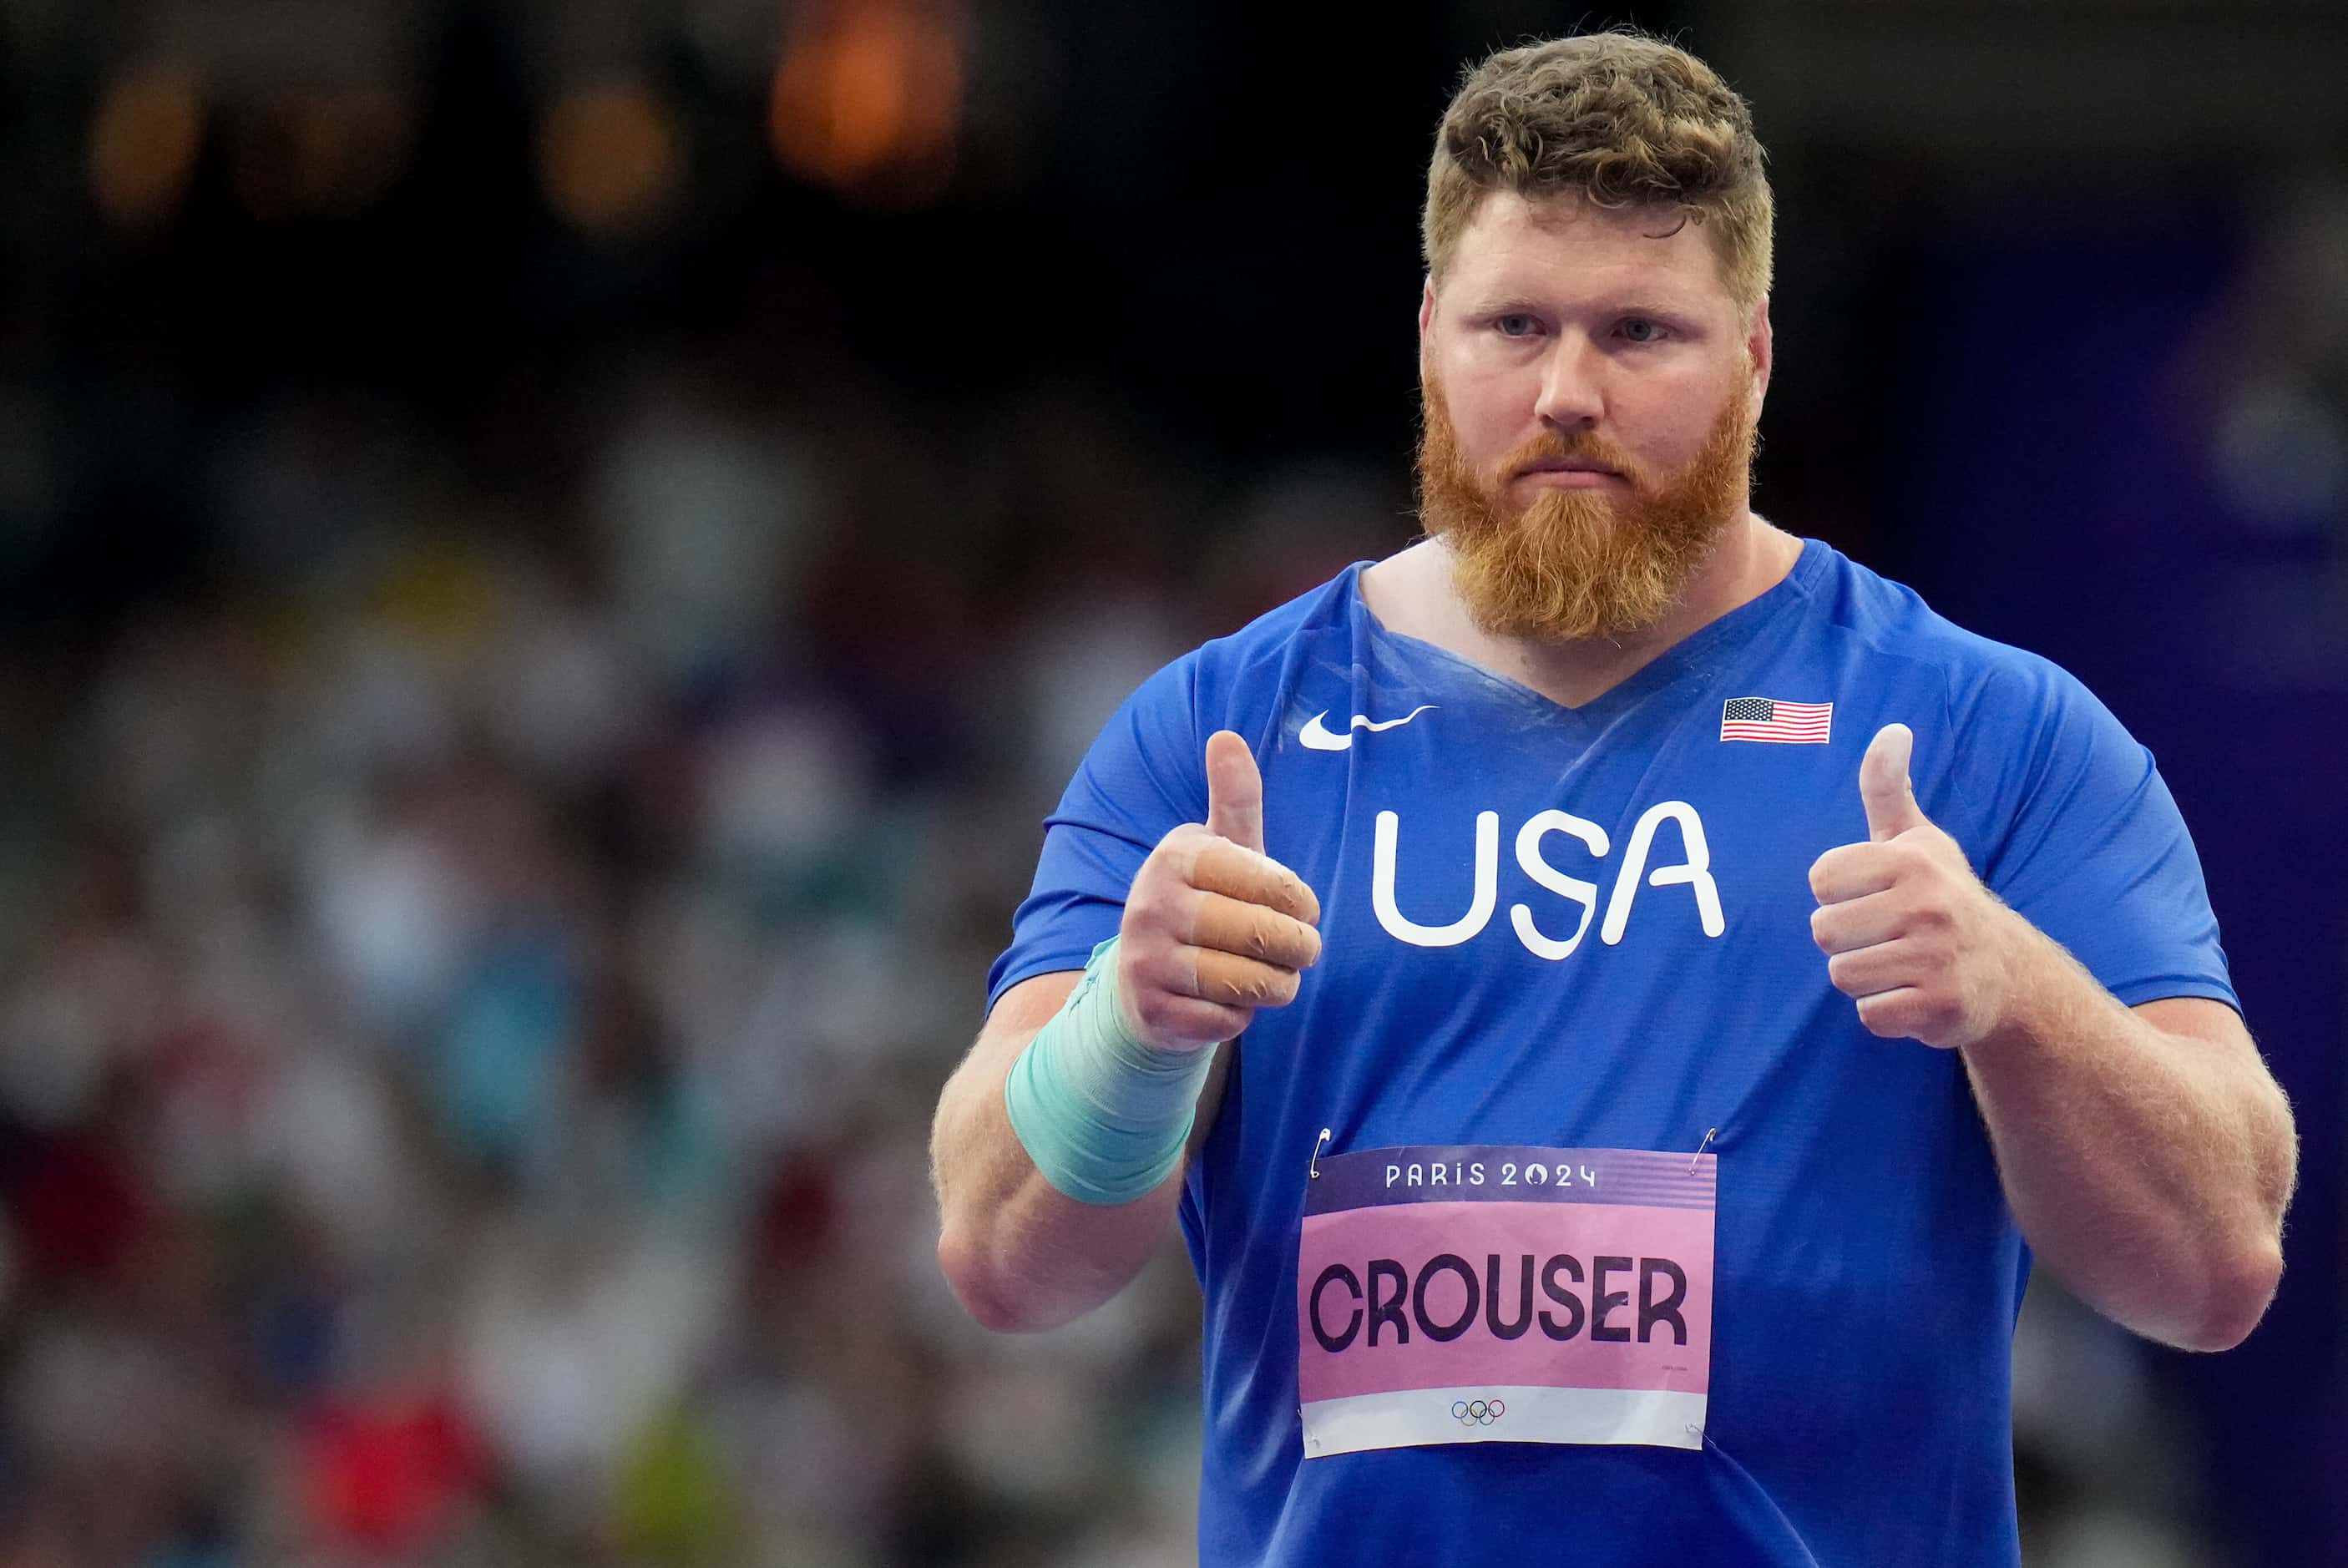 Ryan Crouser reacts while competing in shot put qualifying at the 2024 Summer Olympics on...